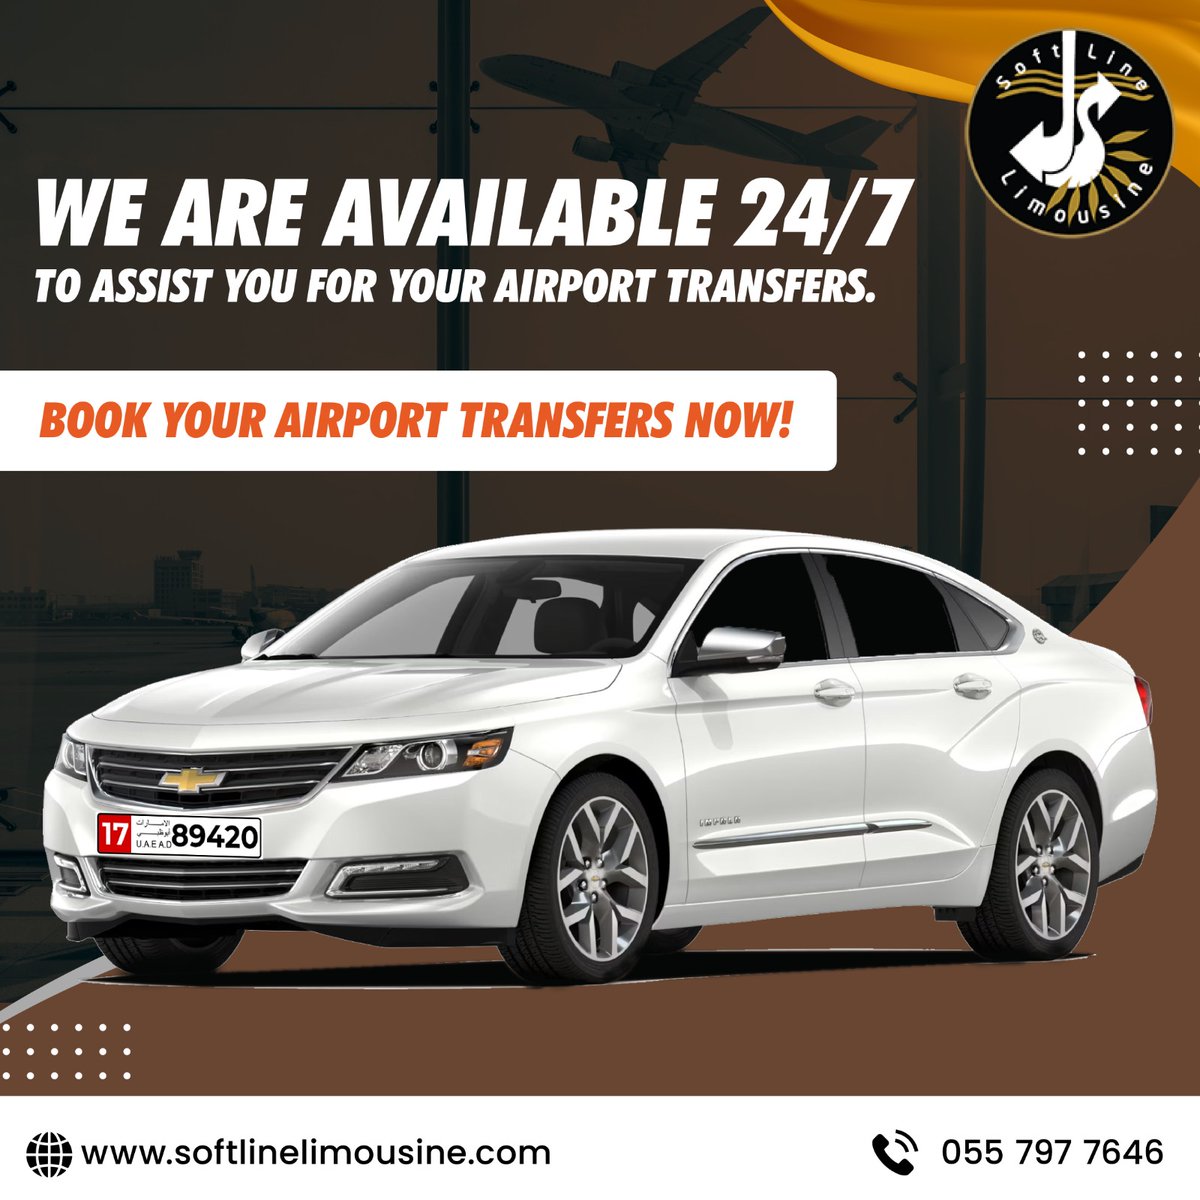 We are available 24/7 to assist you for your Airport Transfers. 
Book your Airport Transfers now!

Call us🤙: +971 050 2370637, 055 7977646 (WhatsApp) 👇👇
Book your ride now at softlinelimousine.com

#dubaiairport #abudhabiairport #airporttransfers #nextride #taxiservices